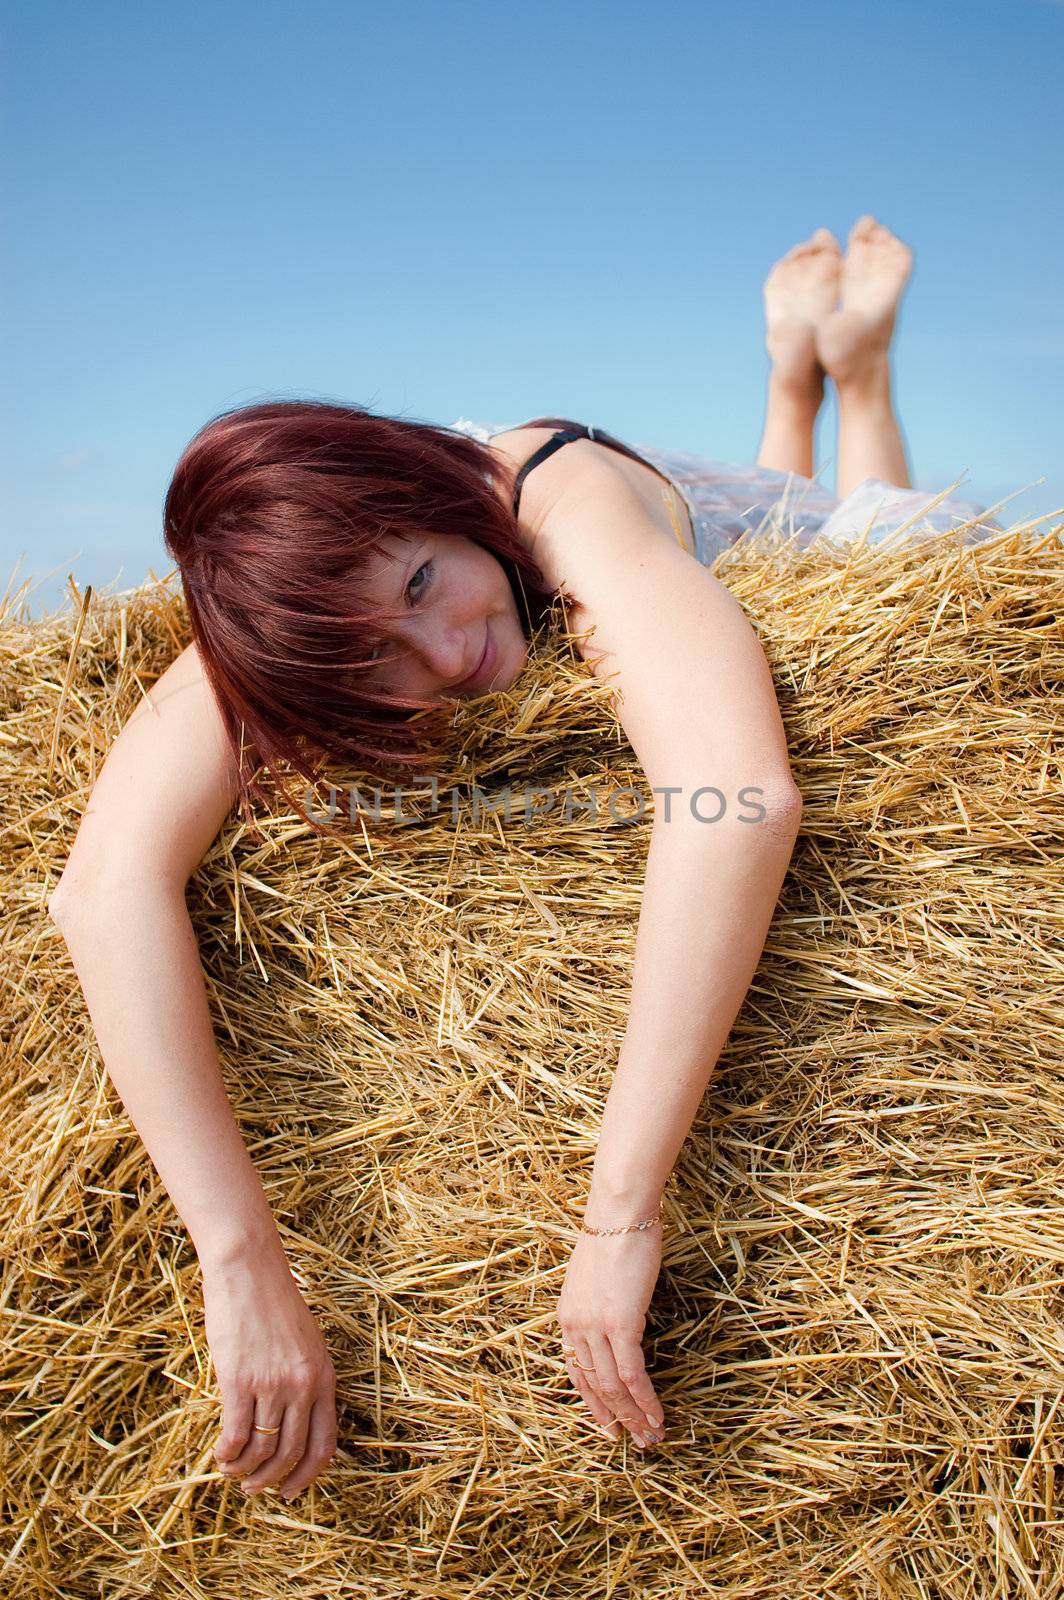 Woman on hay by Axel80